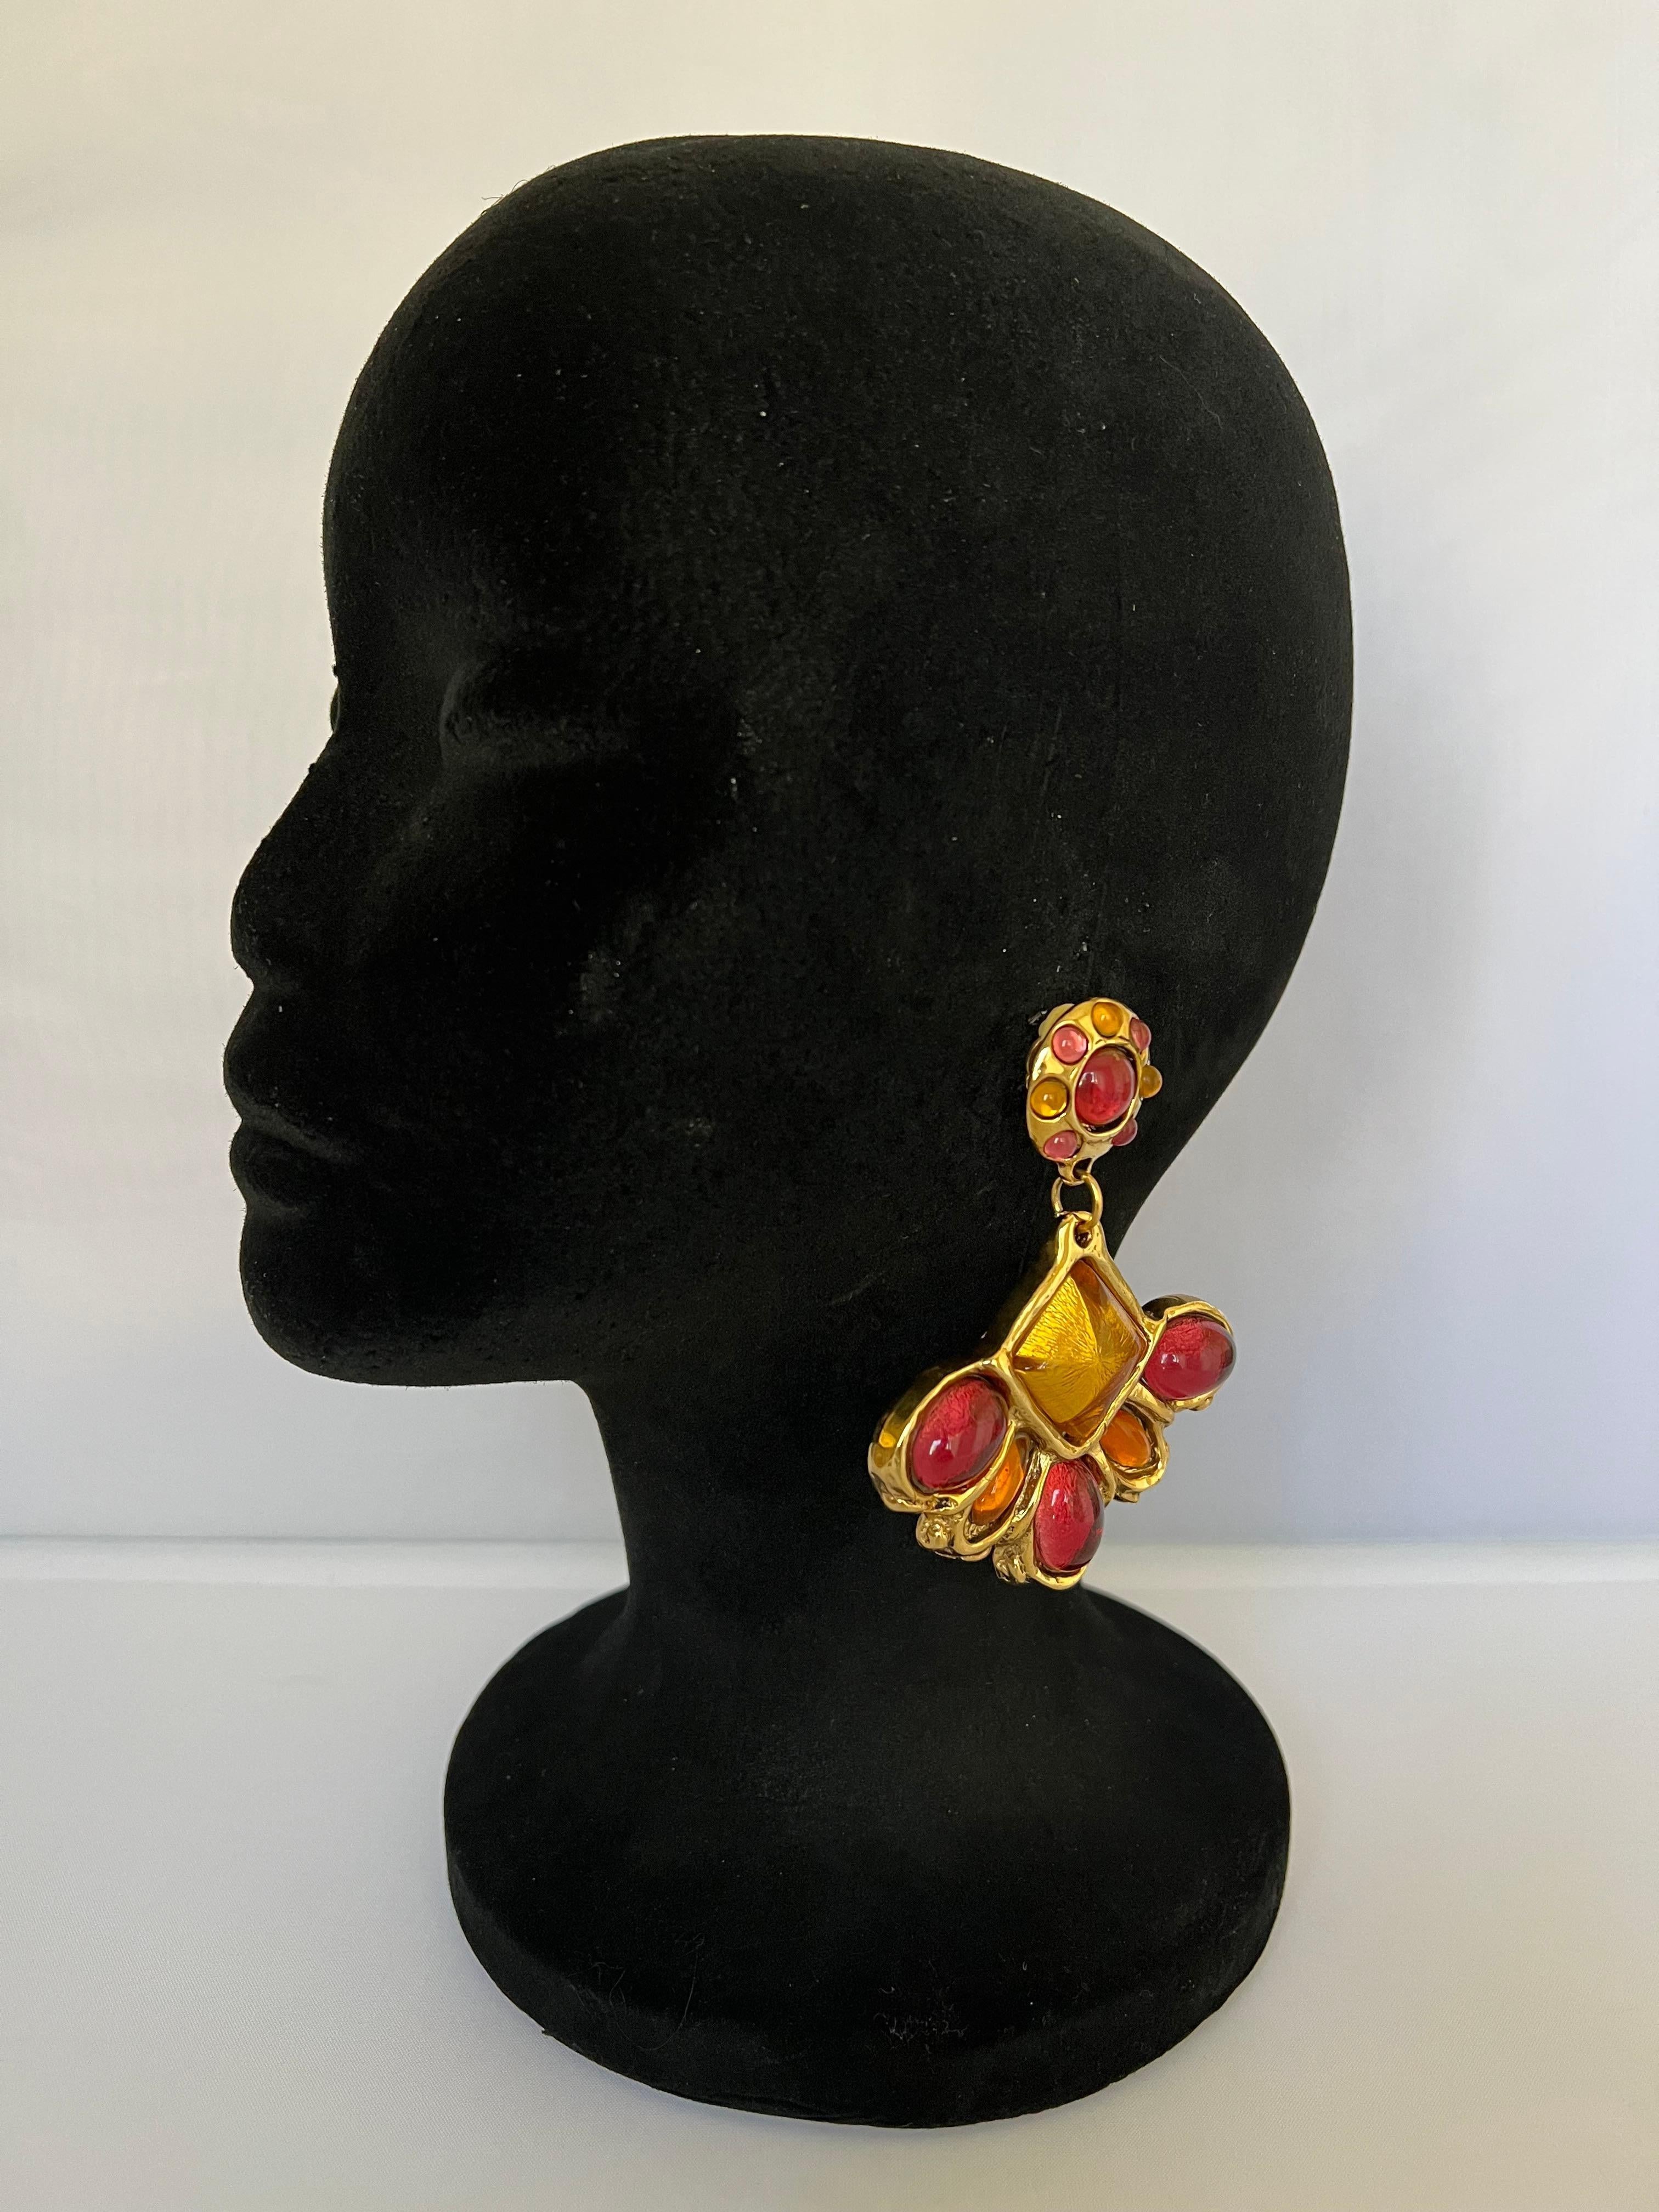 Vintage three-dimensional high fashion fan-shaped gilt jeweled clip-on statement earrings made in Frane circa 1980/90.